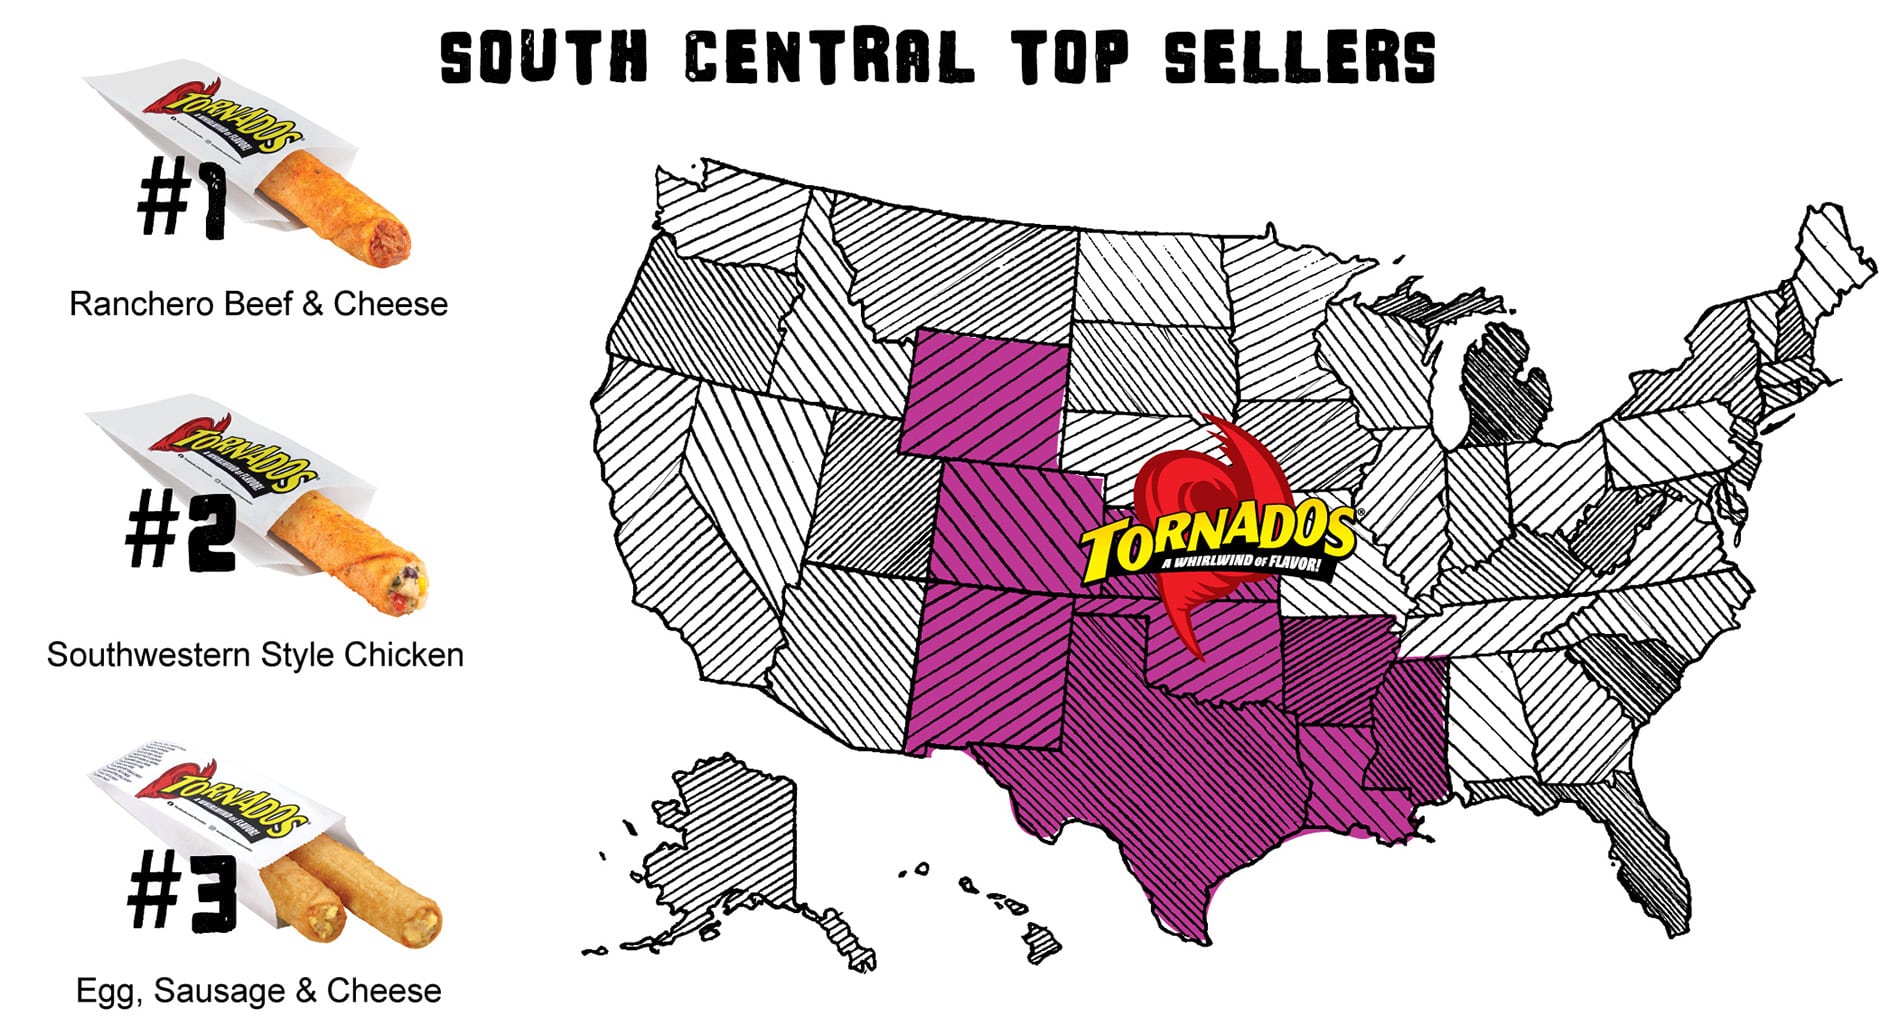 South Central Top Sellers